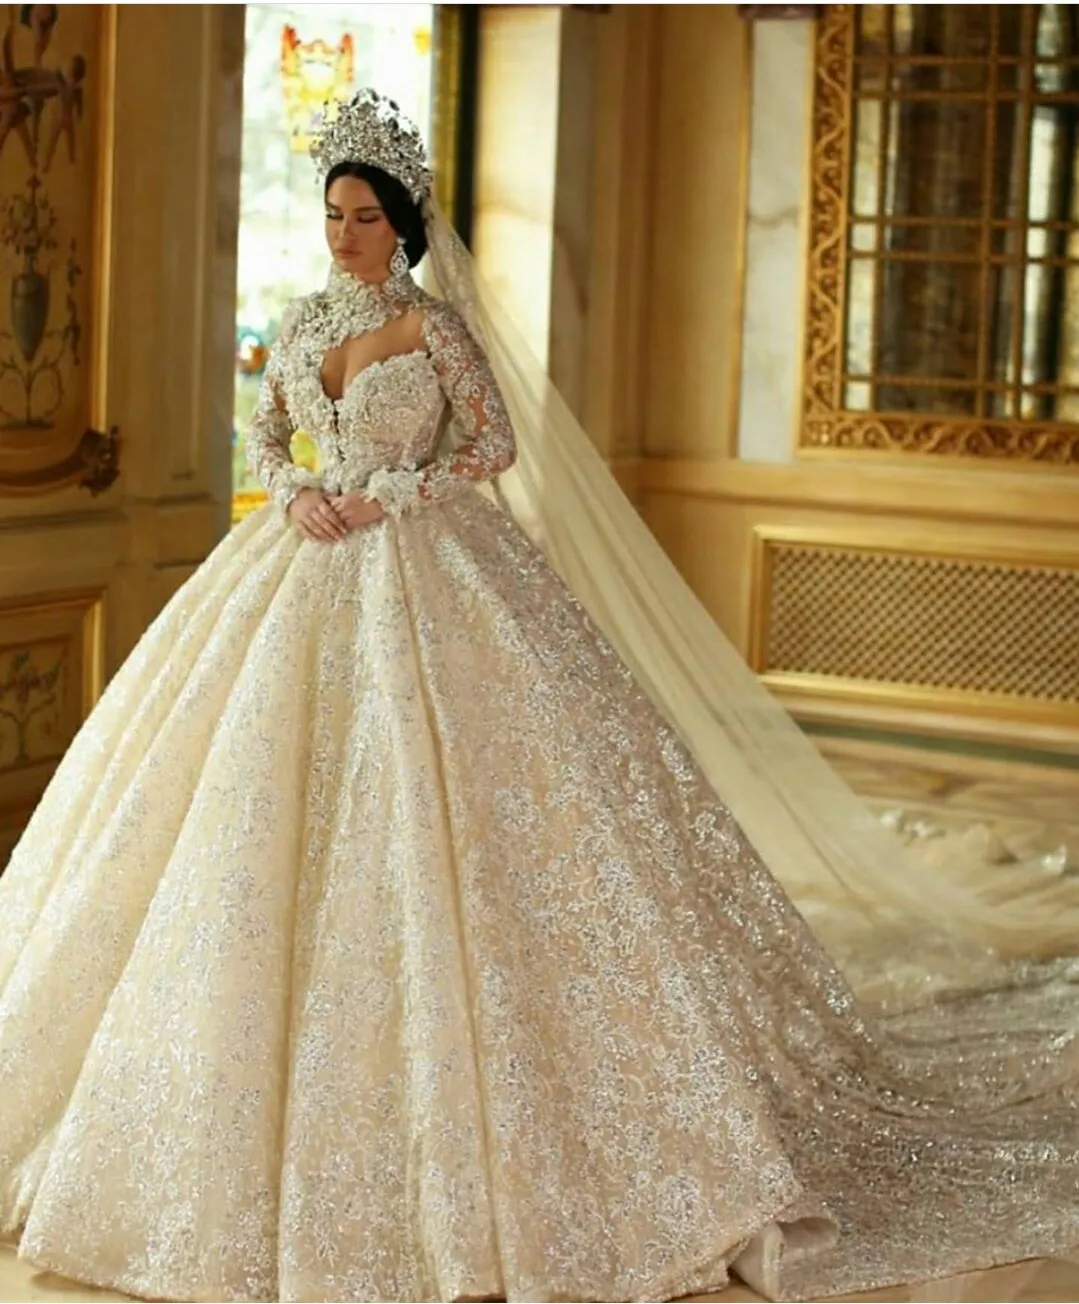 Muslim Style High Neck Bridal Ballroom Wedding Gowns With Lace Appliques  And Beading Pearls Long Sleeves, Plus Size From Mark776, $109.36